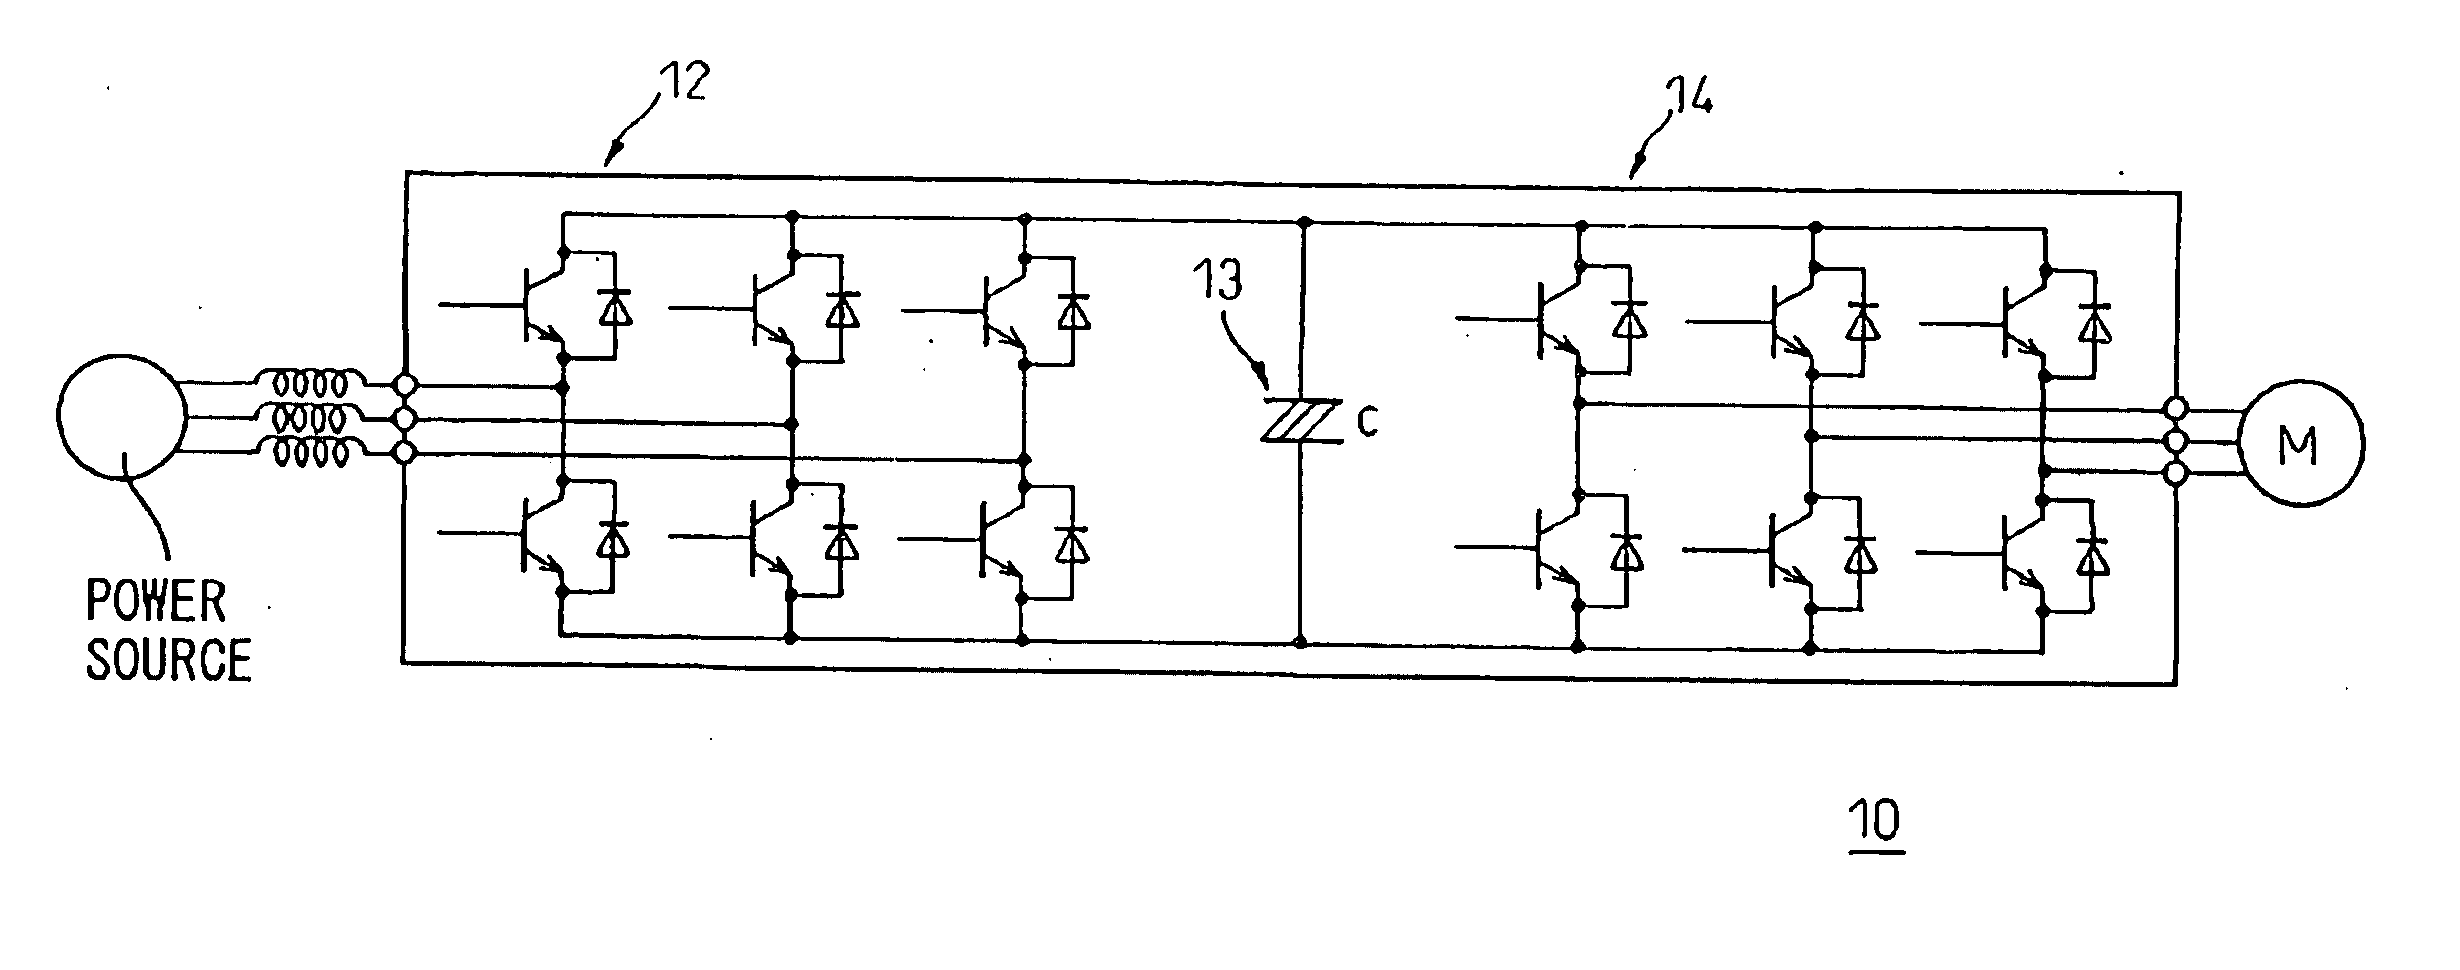 Converter and inverter including converter circuit